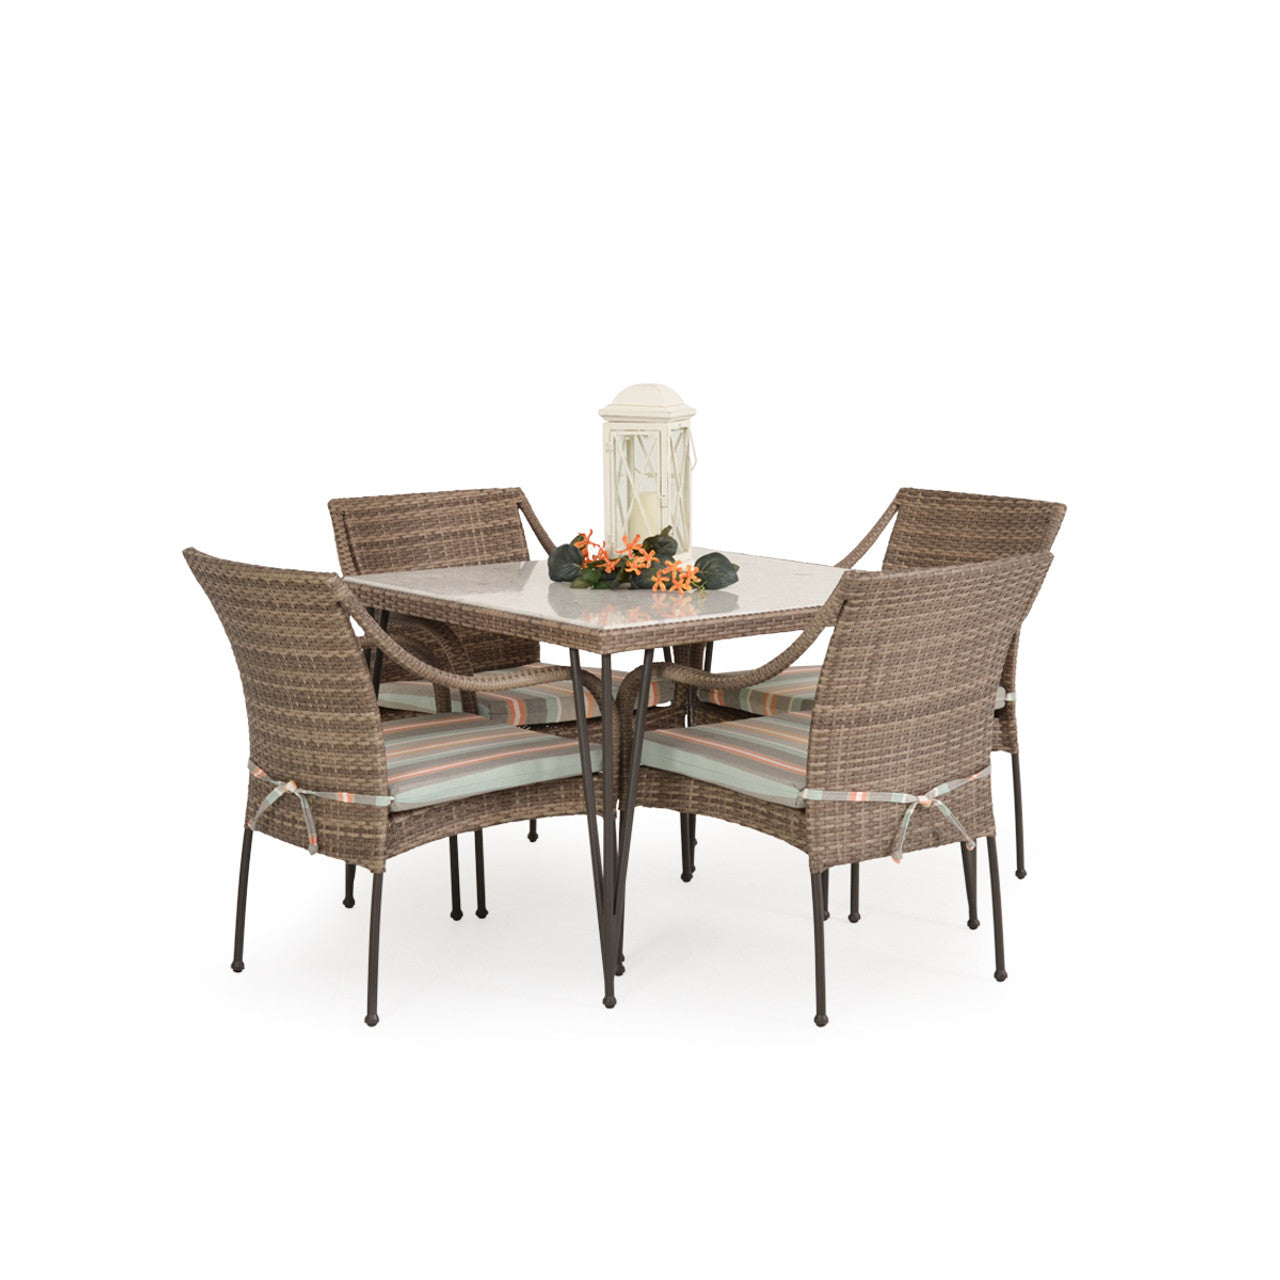 Leaders Furniture Garden Terrace Outdoor Wicker 39" Square Dining Table with Stone Top